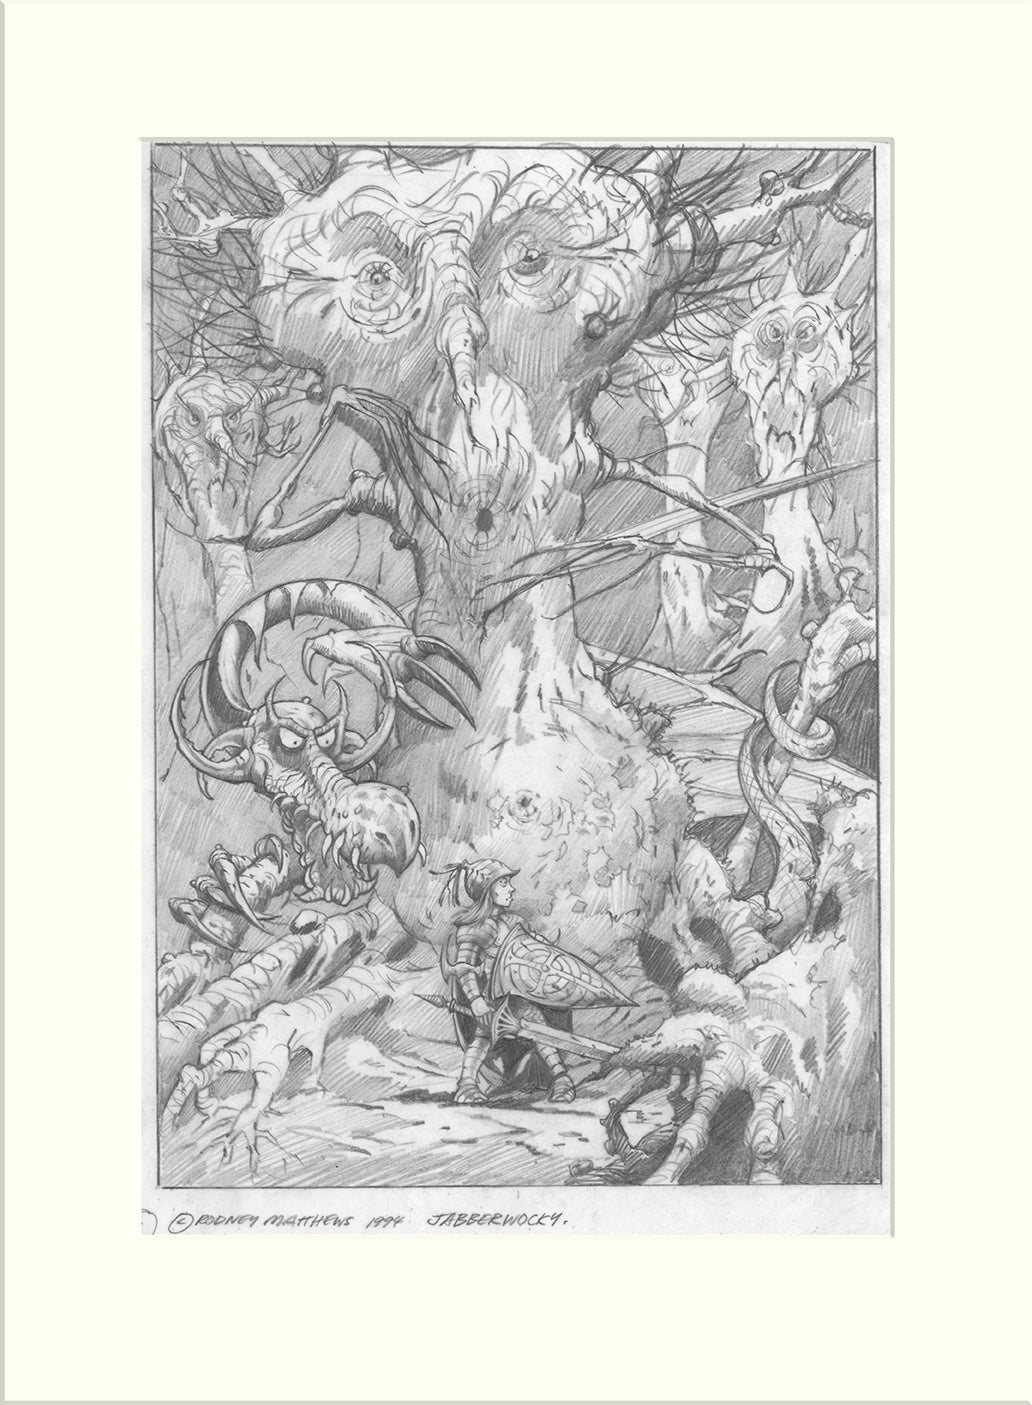 Jabberwocky (Through the Looking Glass/Oliver Wakeman and Clive Nolan) original pencil drawing by Rodney Matthews